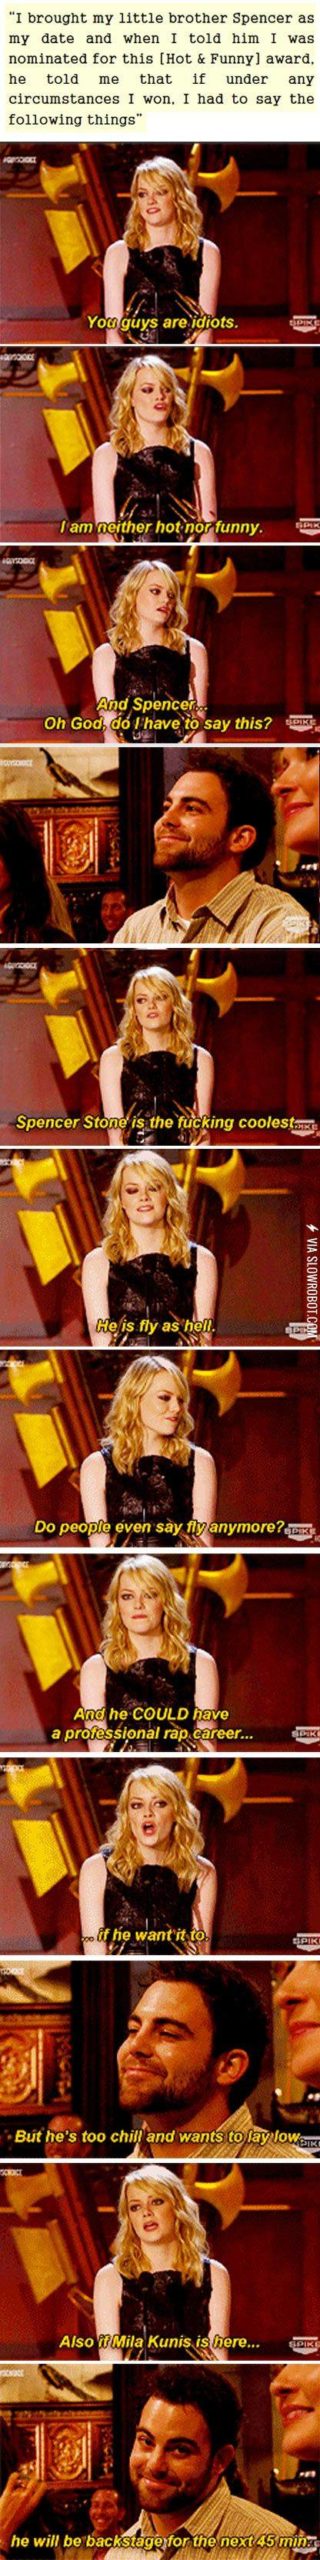 Emma+Stone+is+by+far+the+best+sister+ever.